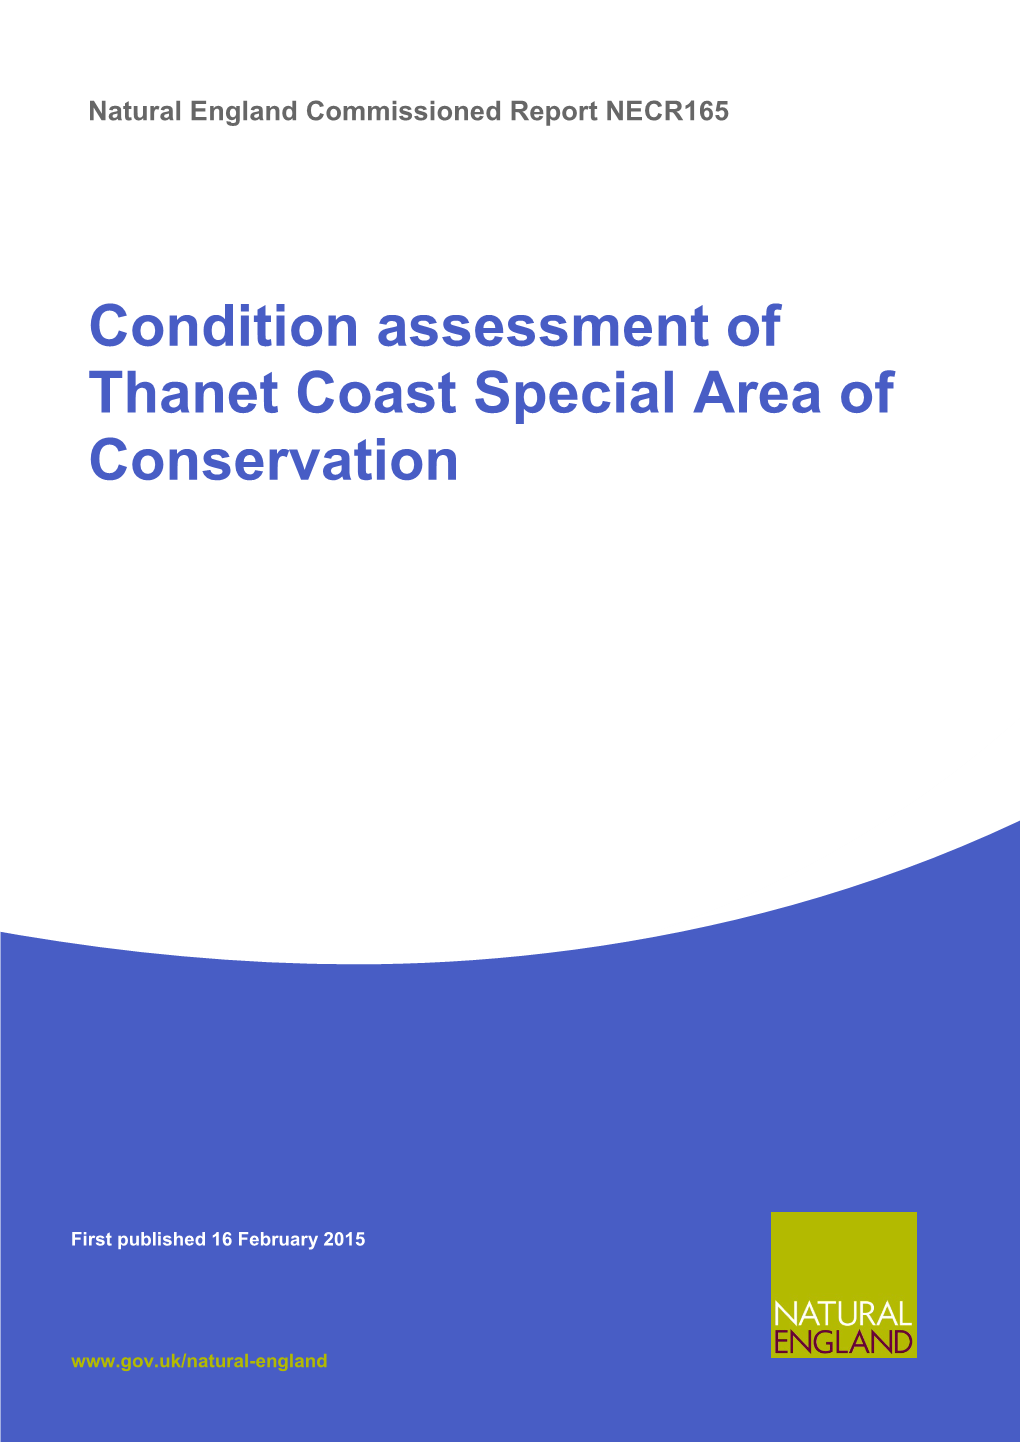 Condition Assessment of Thanet Coast Special Area of Conservation